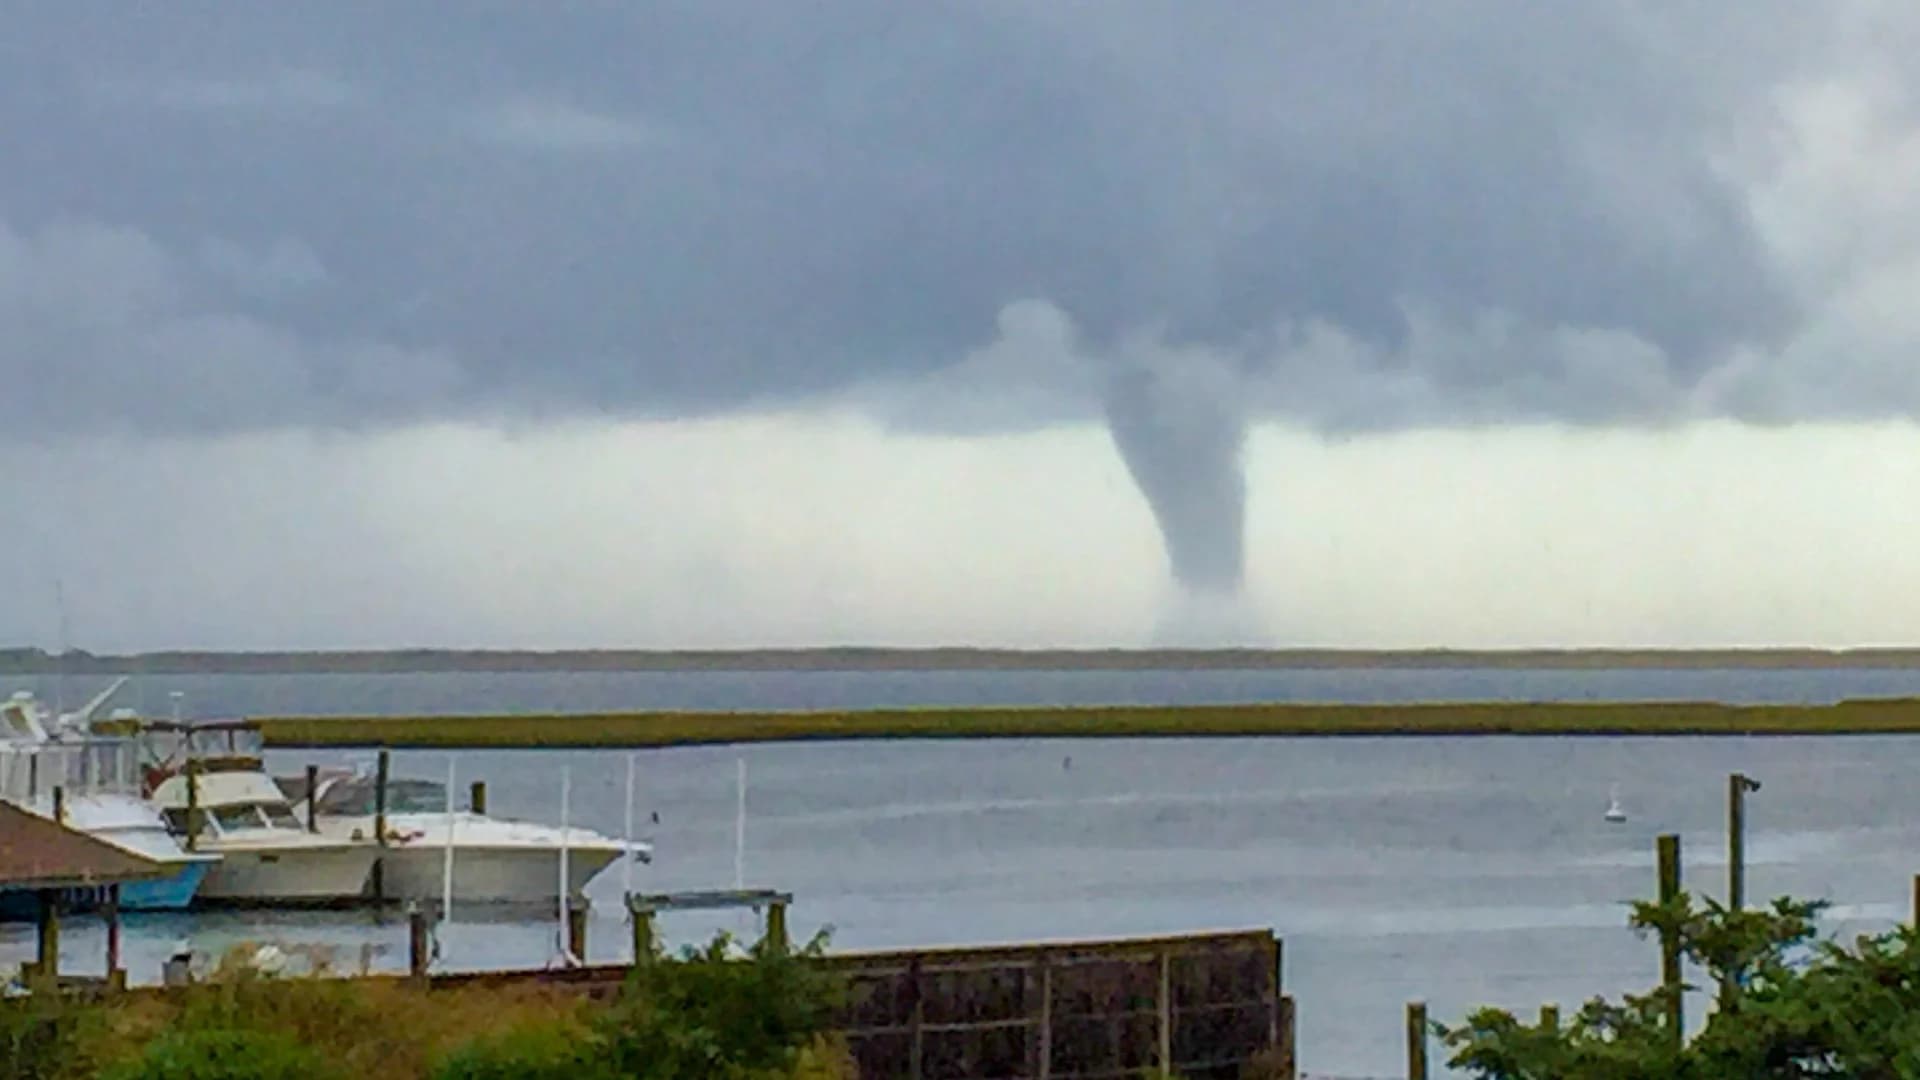 Viewer Photos: Waterspouts seen off South Shore